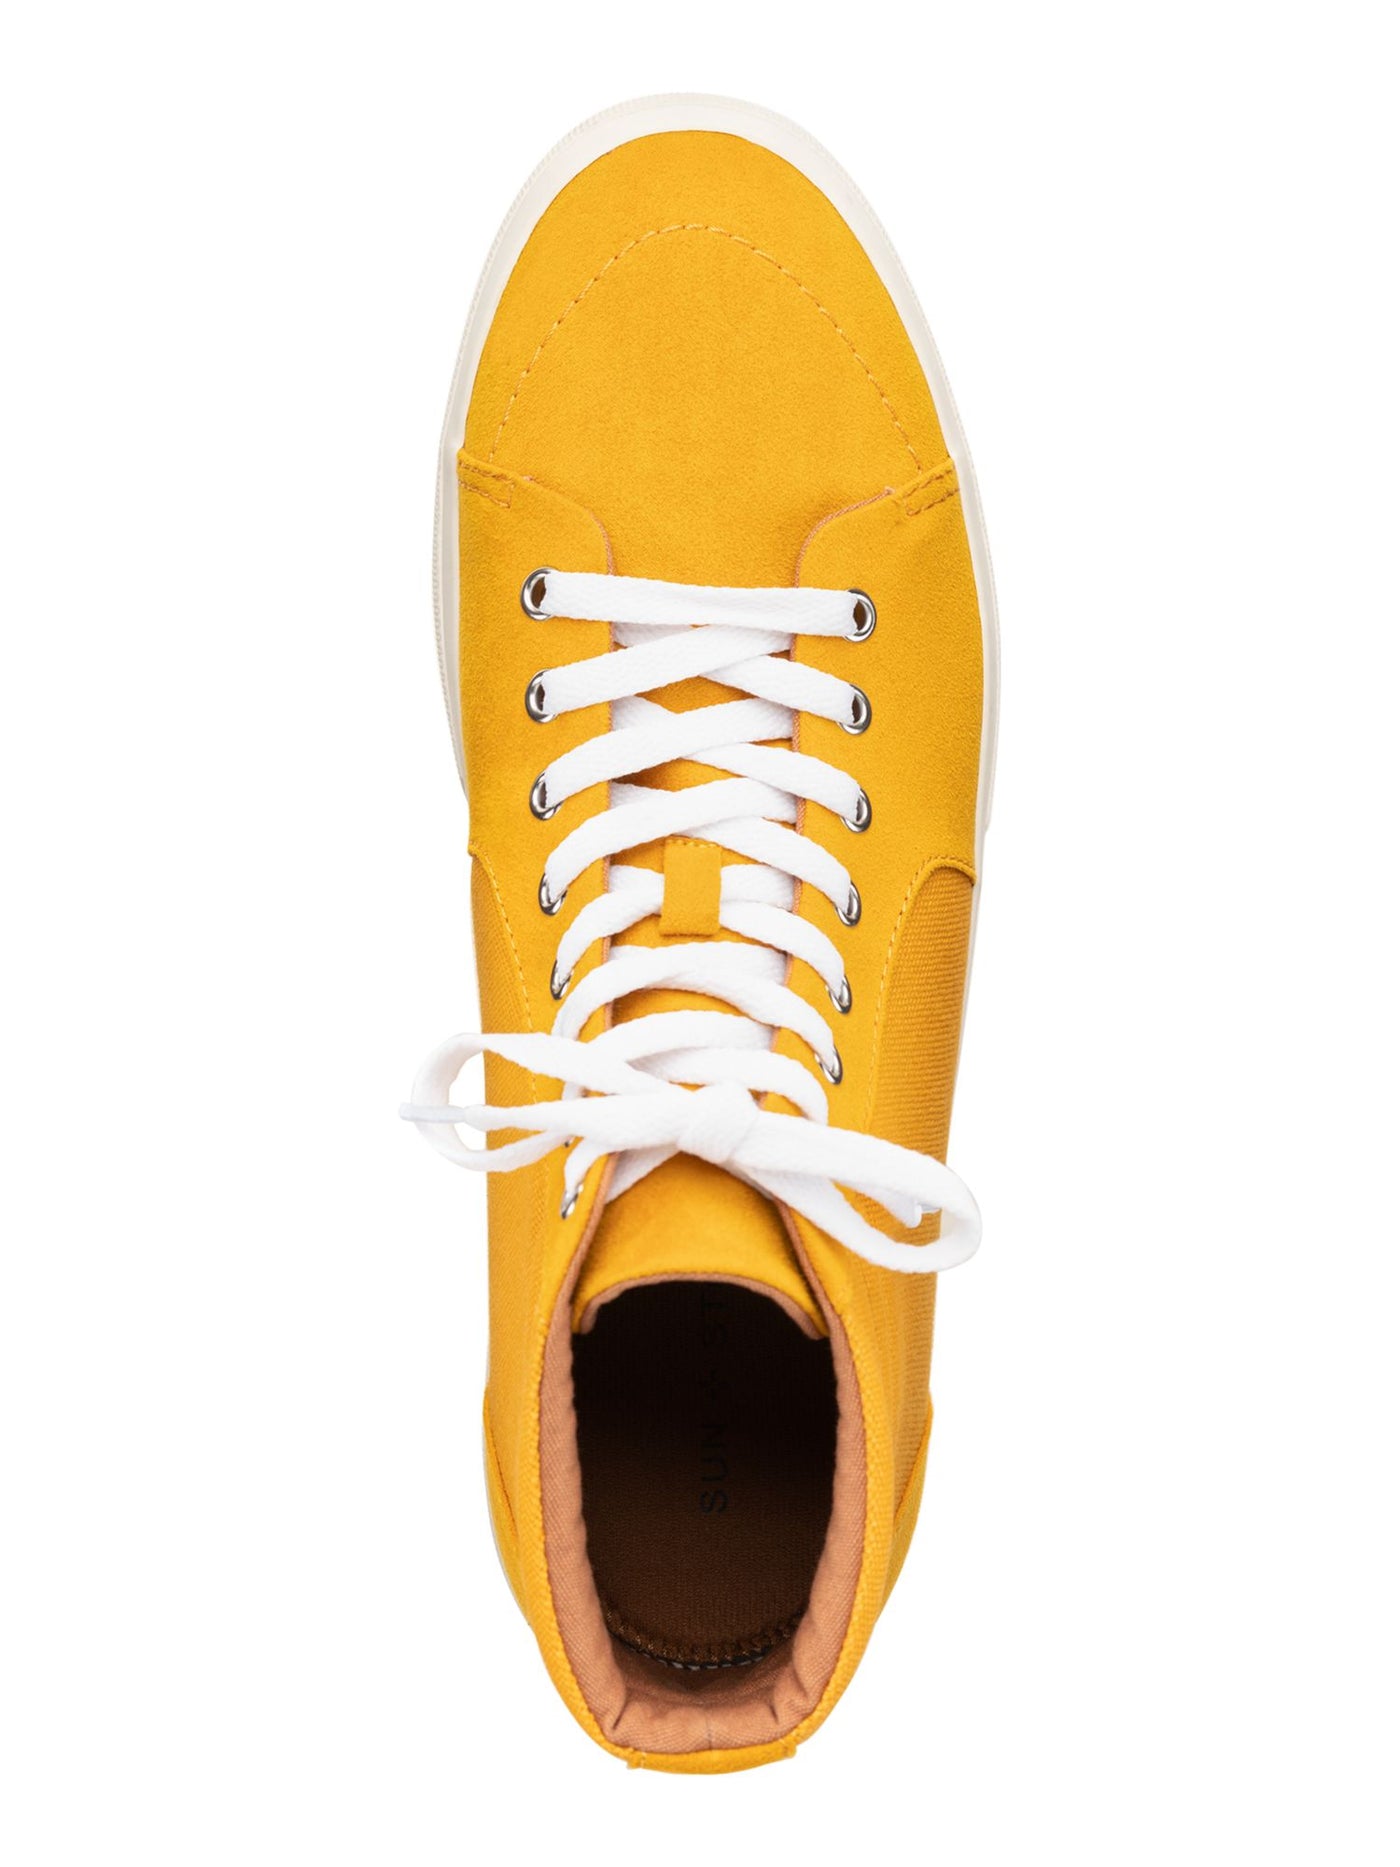 SUN STONE Mens Yellow Cushioned Jett Round Toe Platform Lace-Up Athletic Sneakers Shoes 8 M